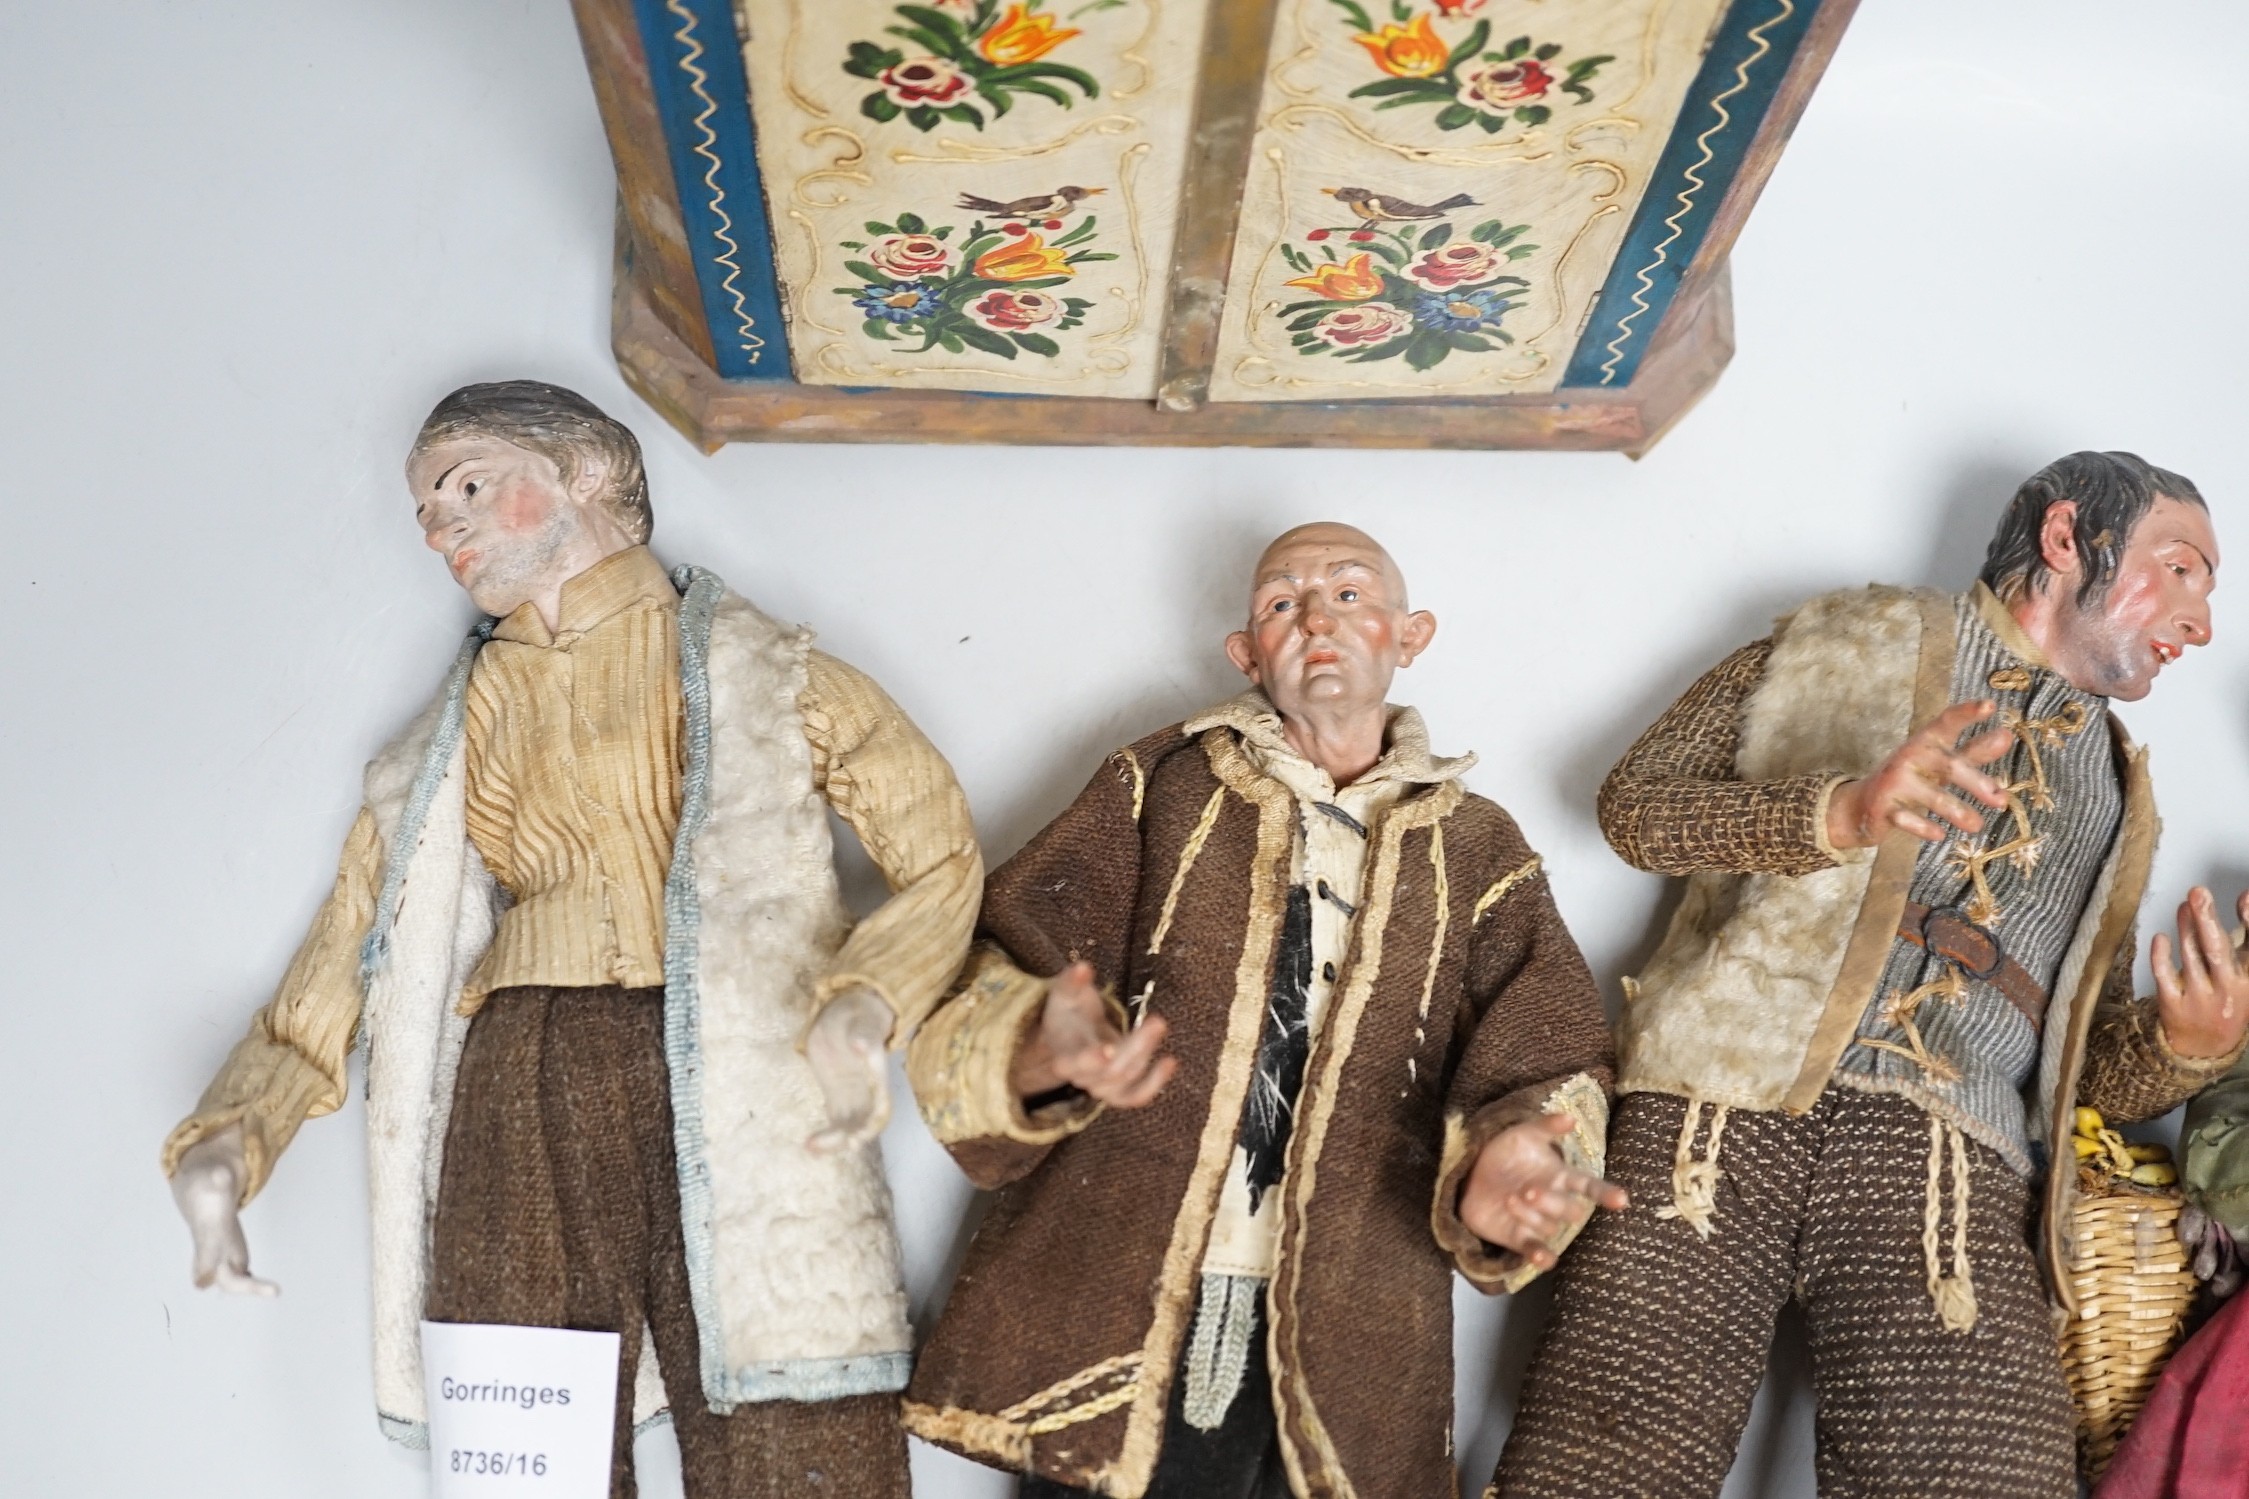 Four 18th/19th century Neapolitan painted wood or terracotta crèche figures, tallest 31.5cm and a - Image 3 of 5